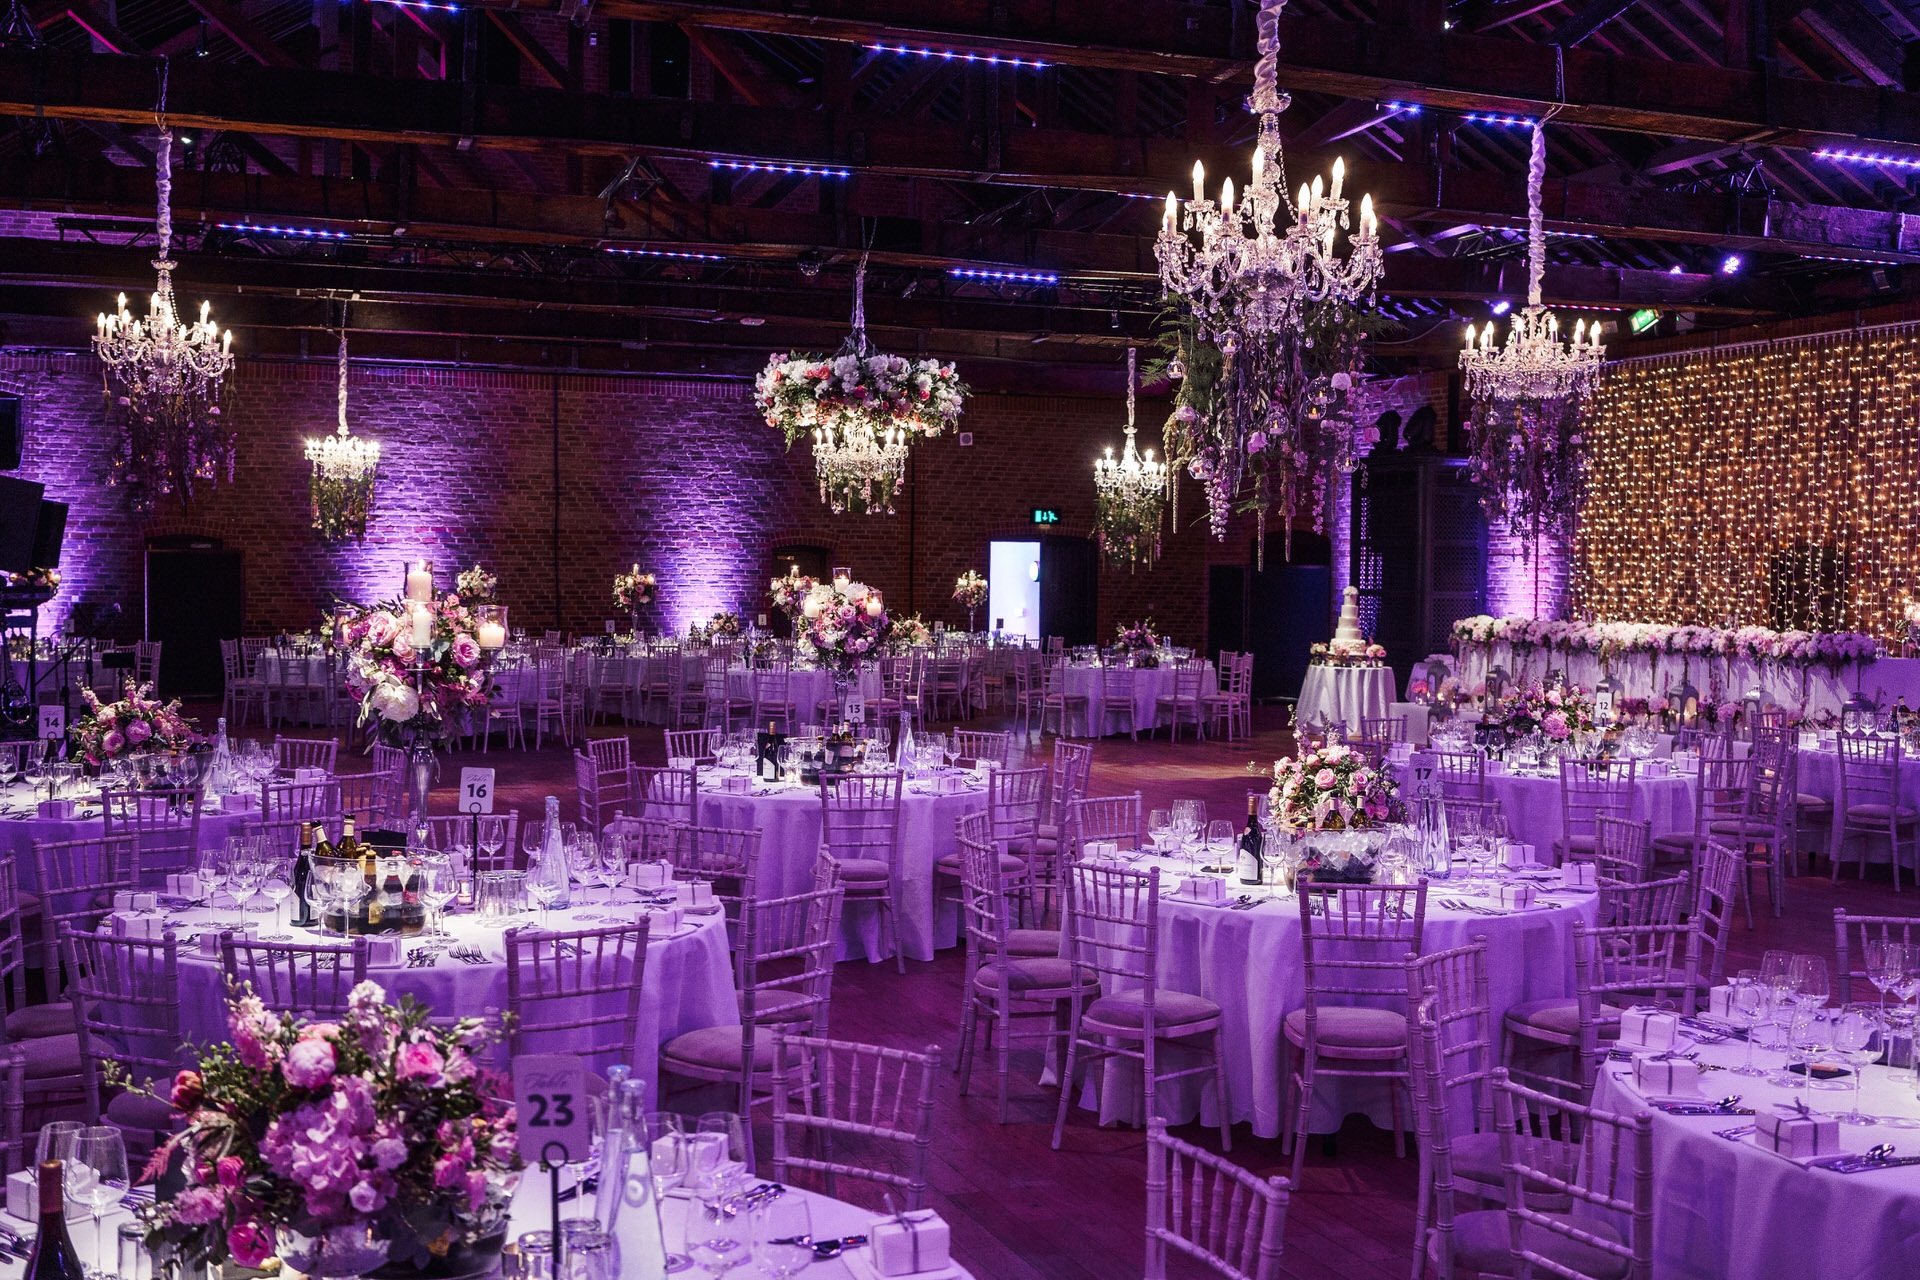 Top Dry Hire Wedding Venue London in the world The ultimate guide 